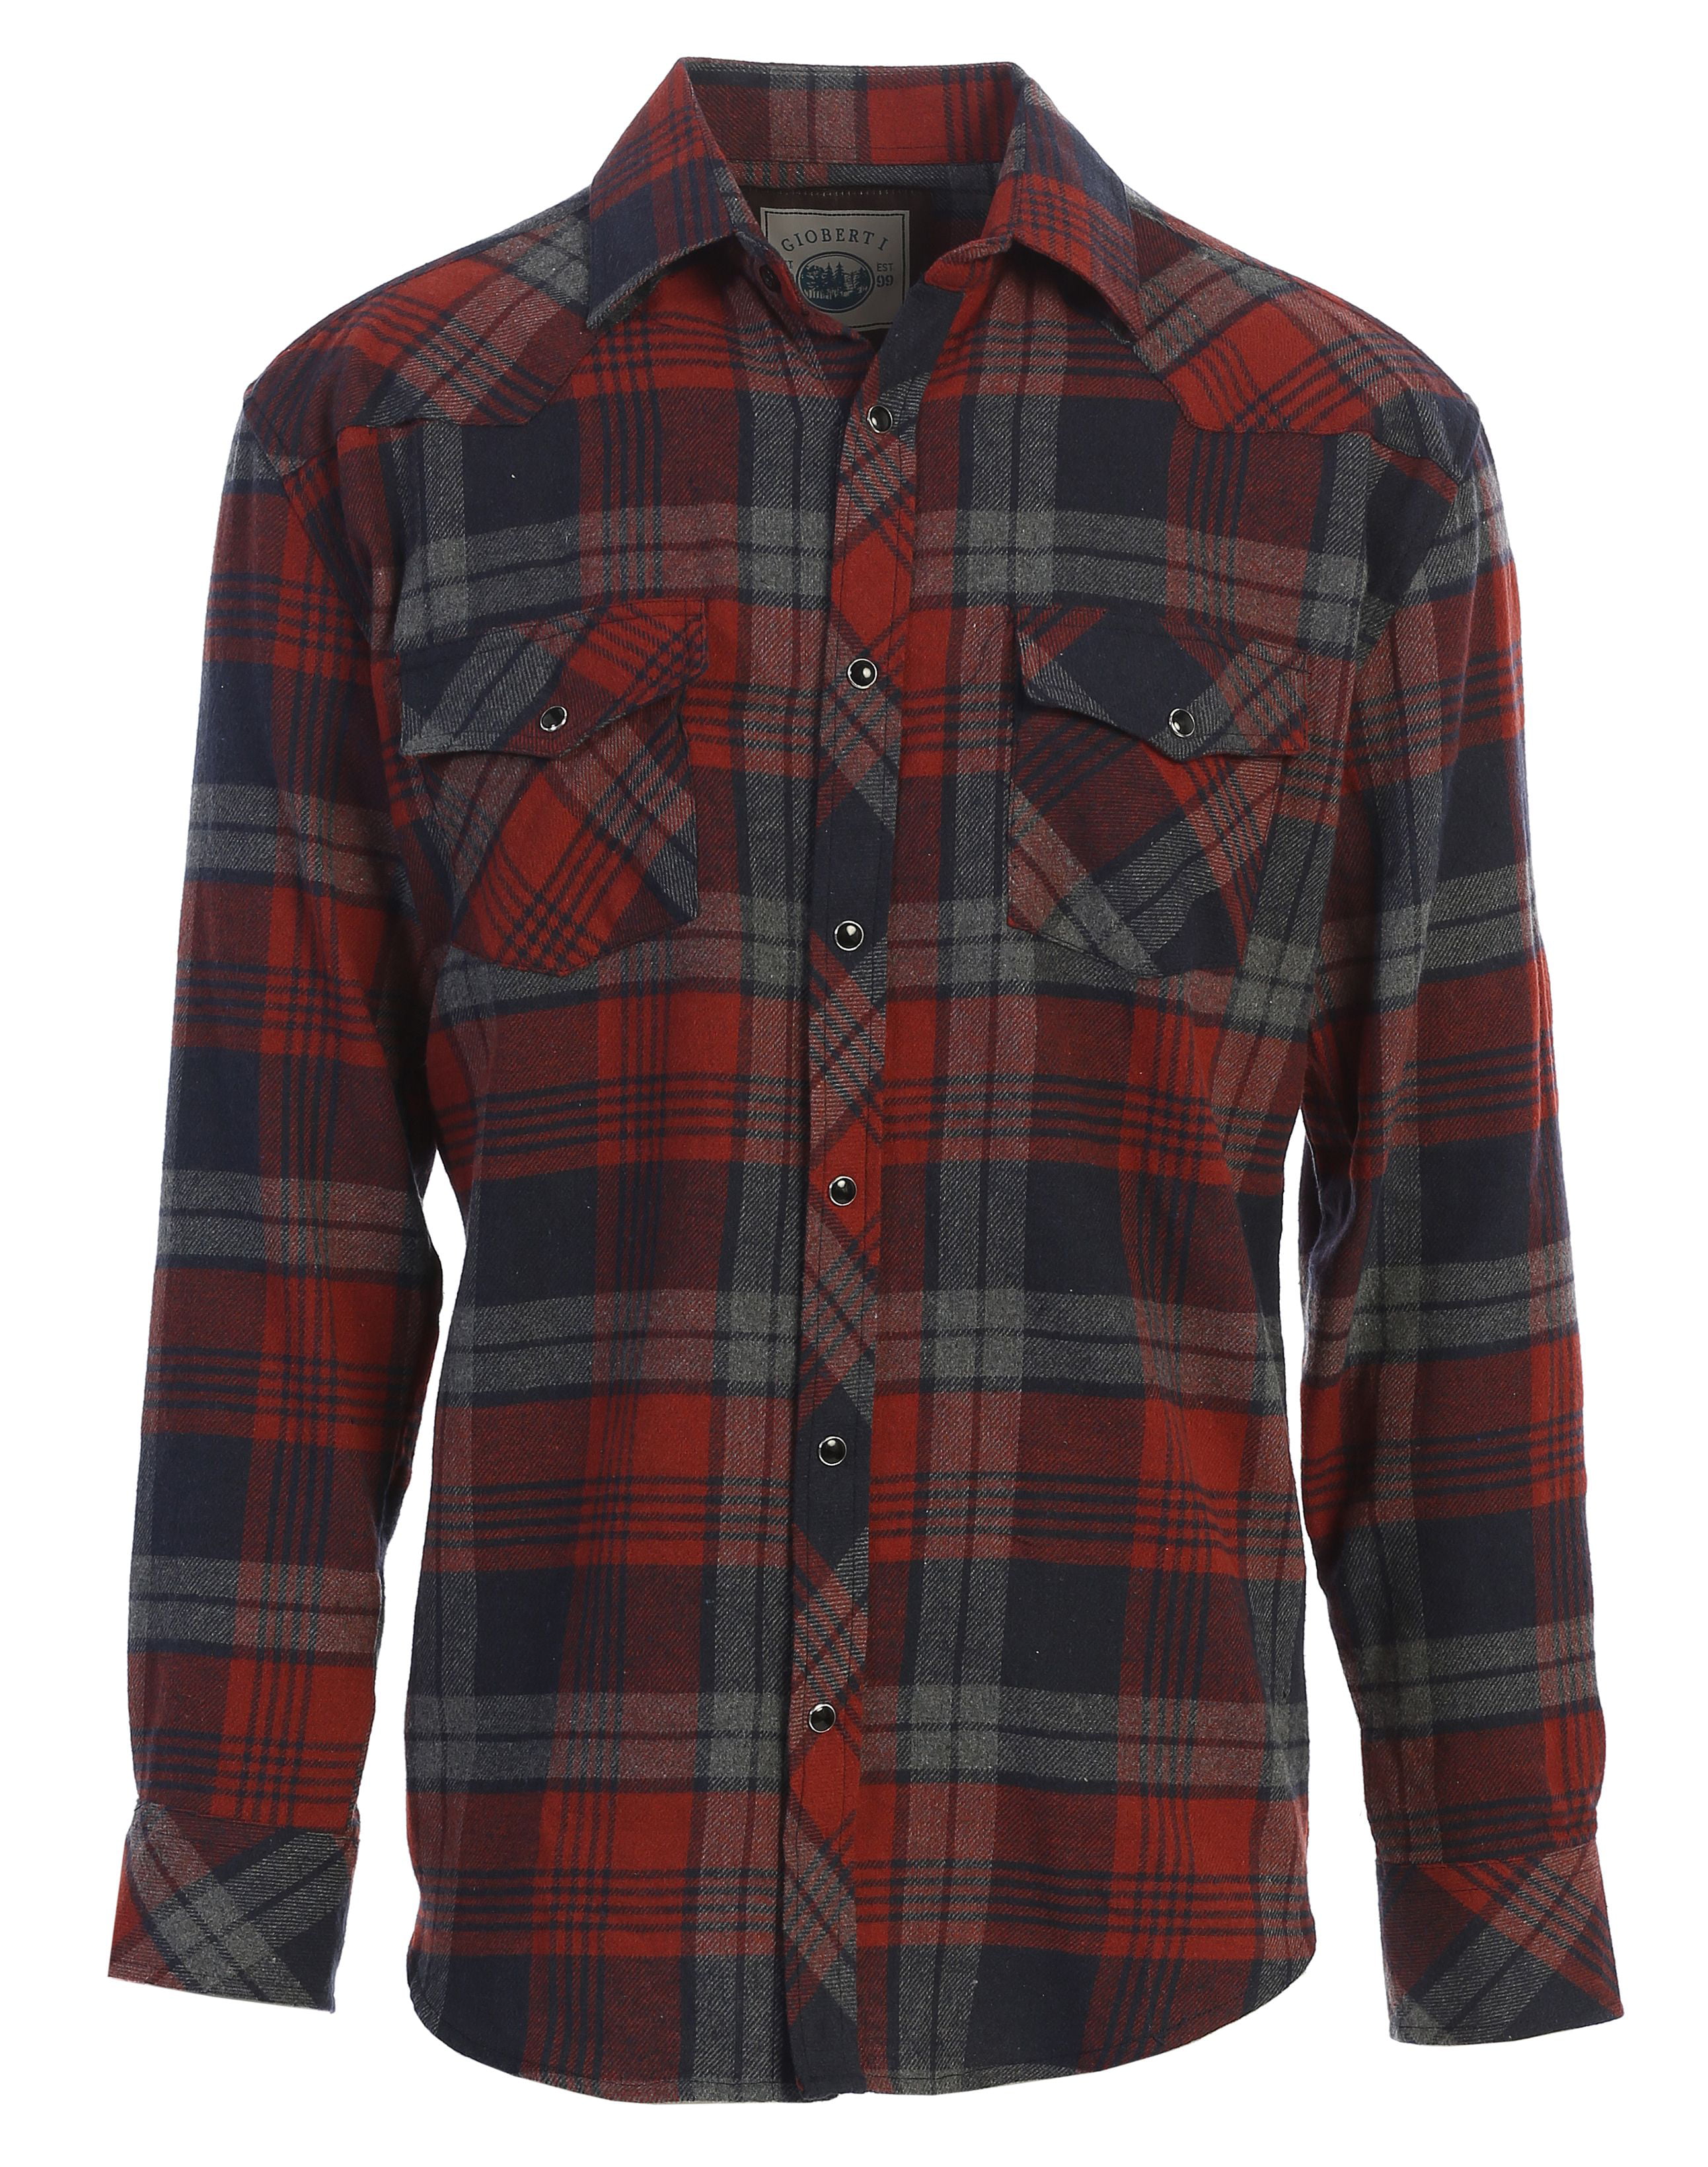 Gioberti Men's Western Brushed Flannel Plaid Checkered Shirt w/ Snap-on Button - Walmart.com